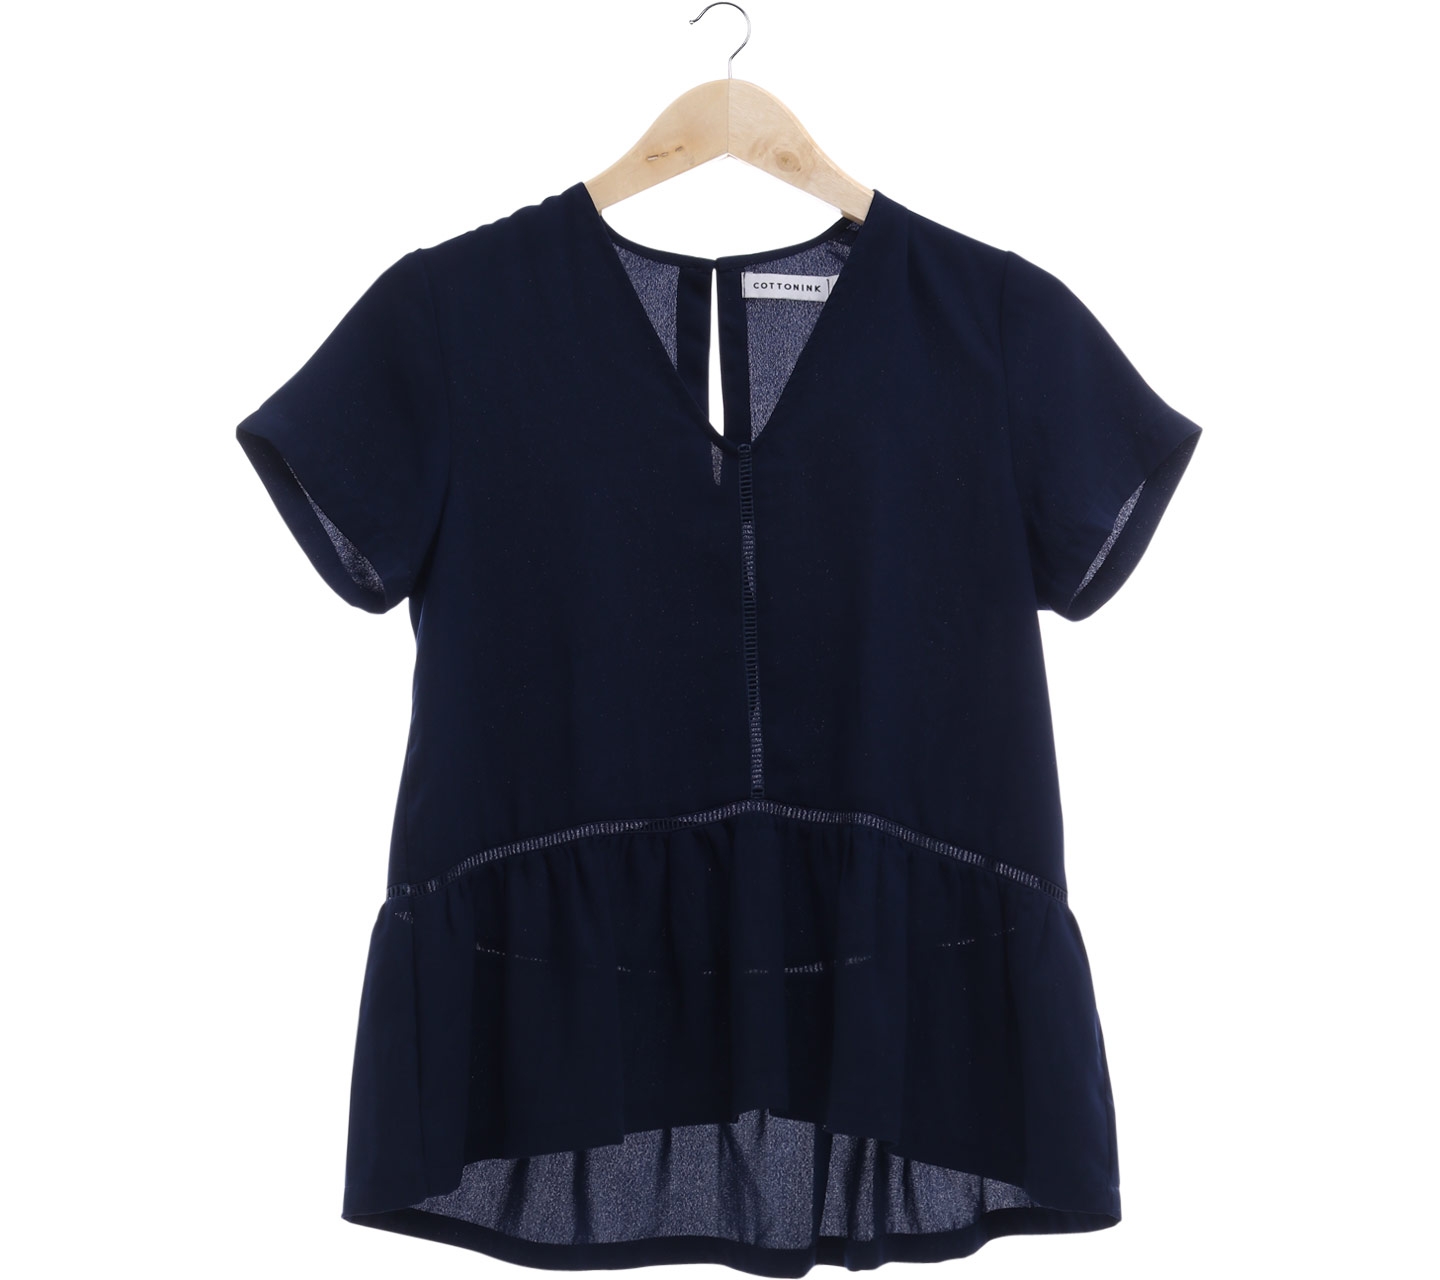 Cotton ink navy blouse